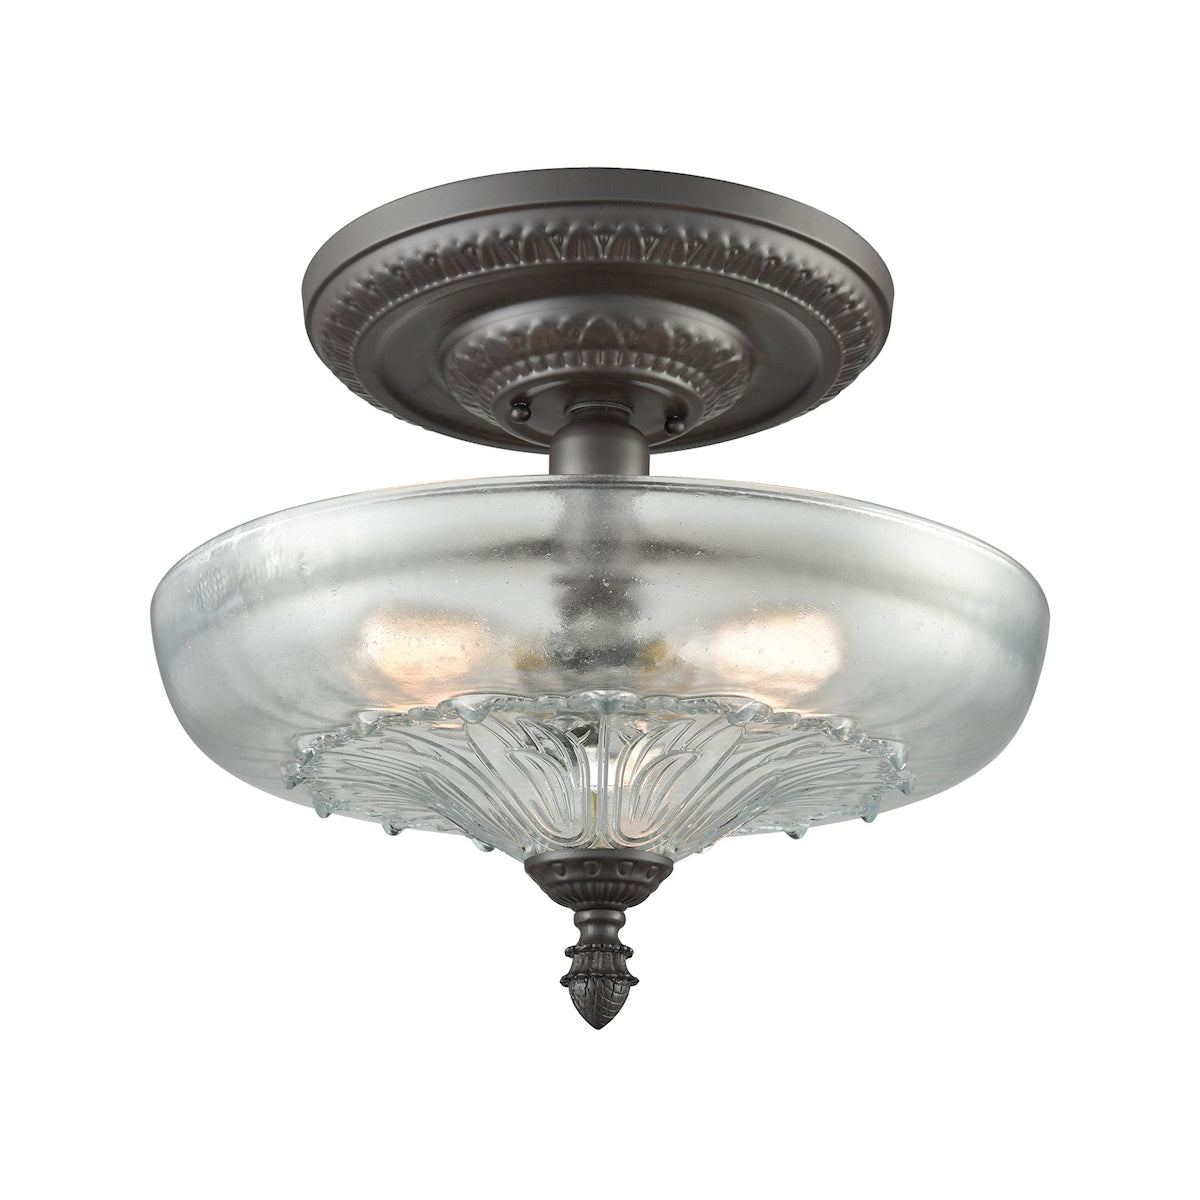 ELK Lighting 66395-3 Restoration 3-Light Semi Flush in Oil Rubbed Bronze with Clear and Frosted Glass